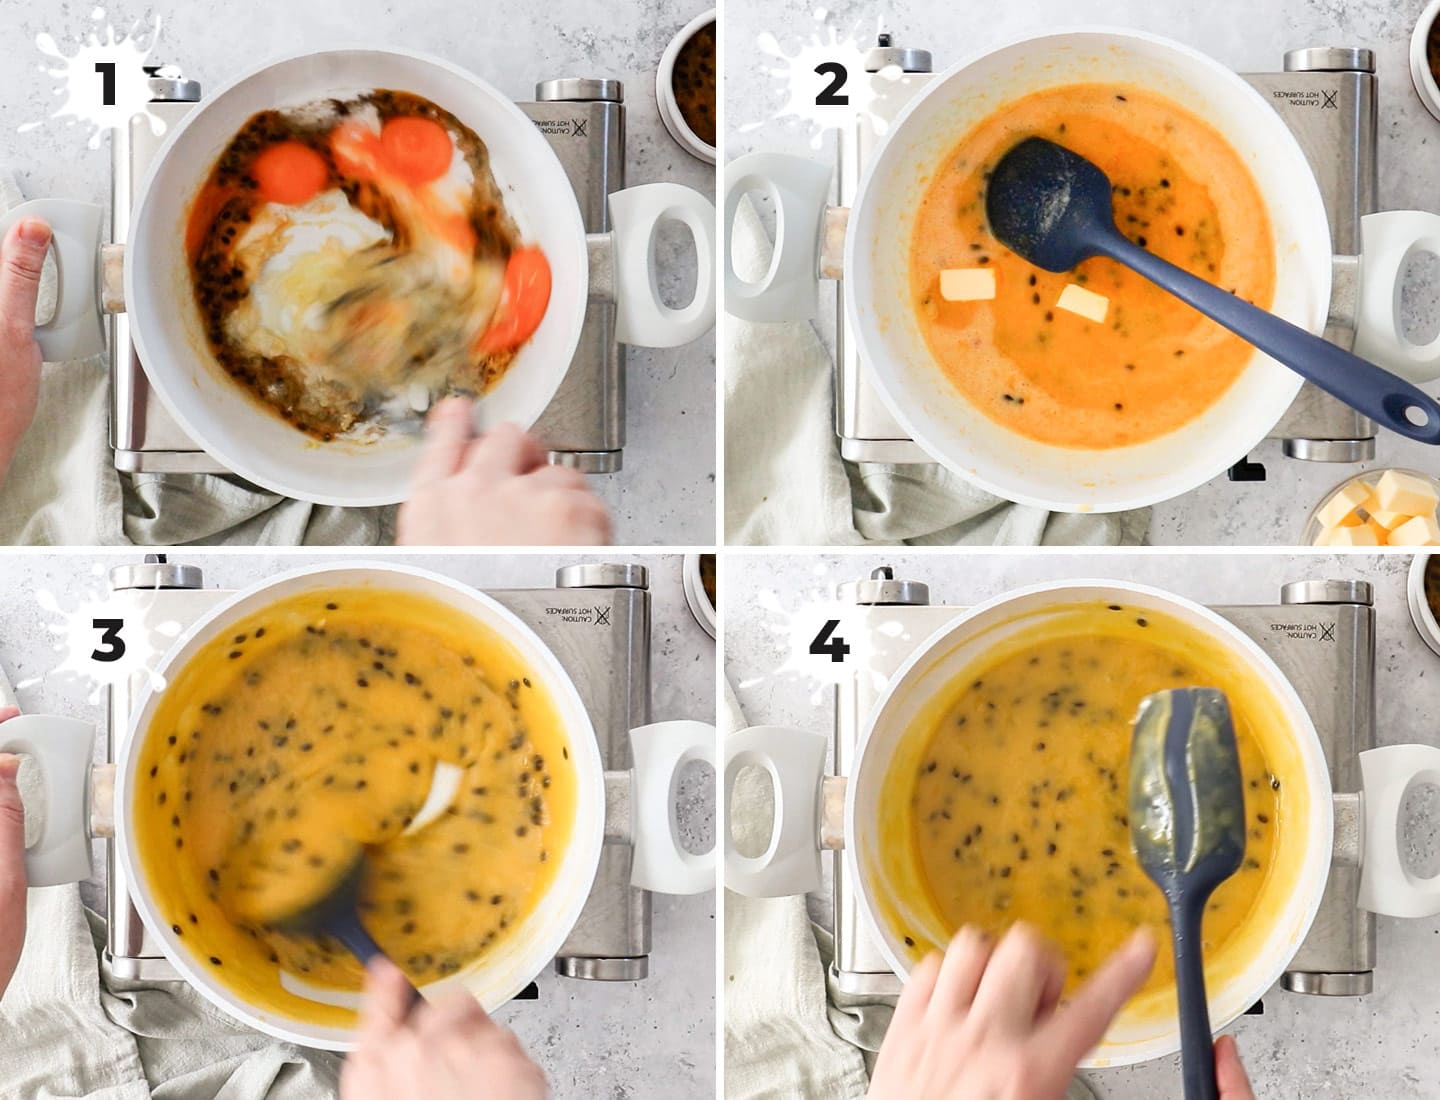 A collage of 4 images showing how to make passionfruit curd.